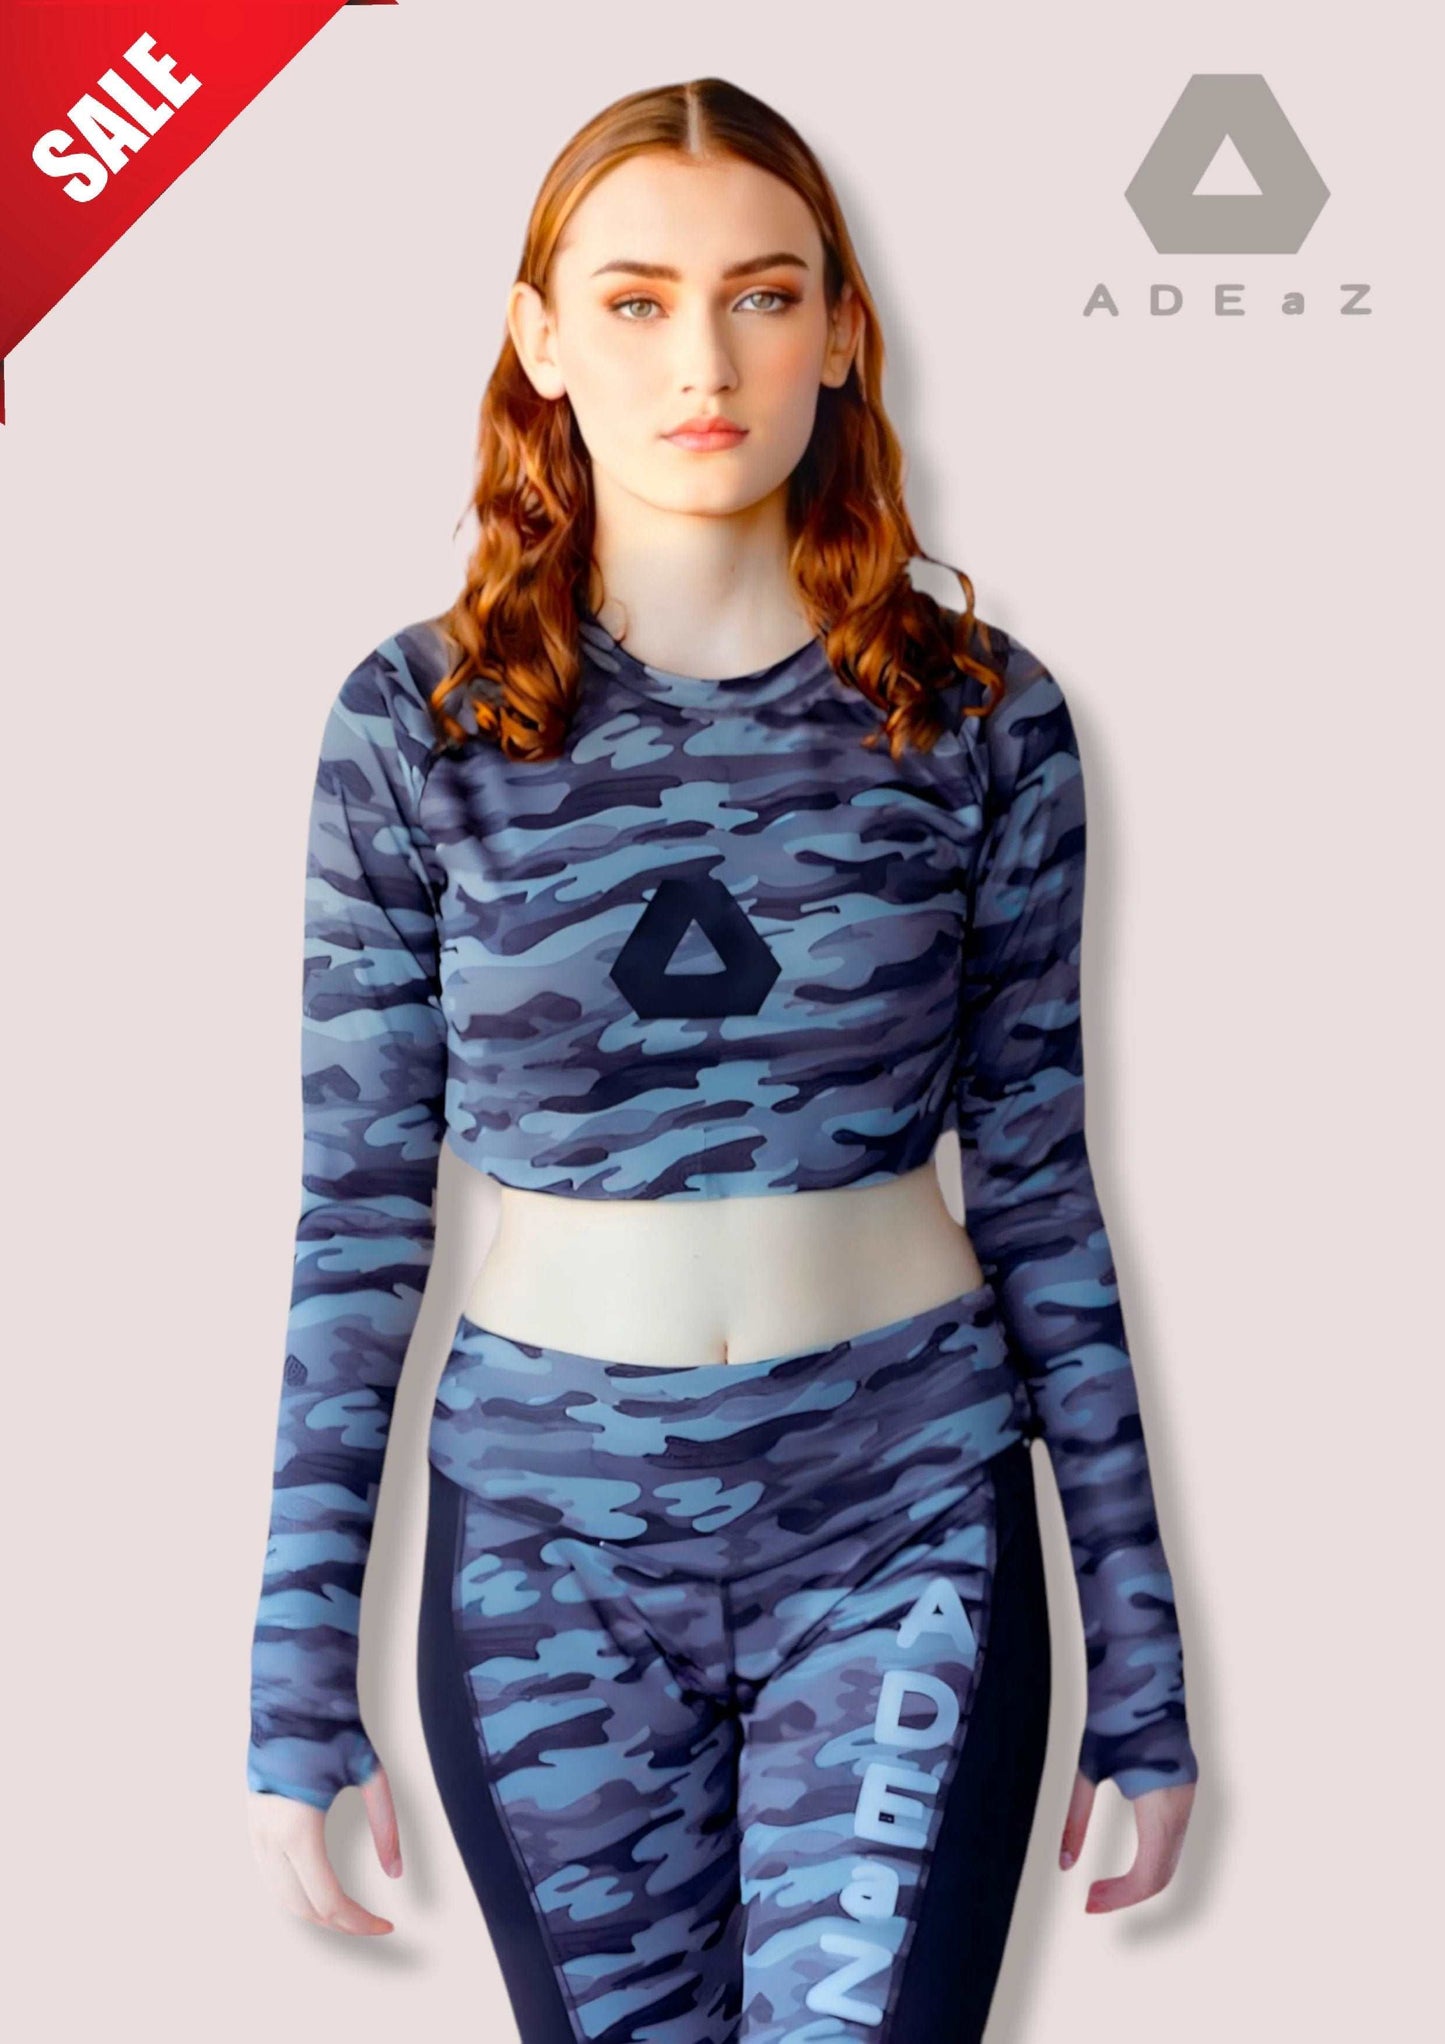 Camouflage Crop Top with Cycle Short Legging also in camouflage, aerie camo crop top alien camo crop top camo pants and crop top tops to wear with camo leggings ways to cut a crop top ways to wear crop tops blue camo crop top